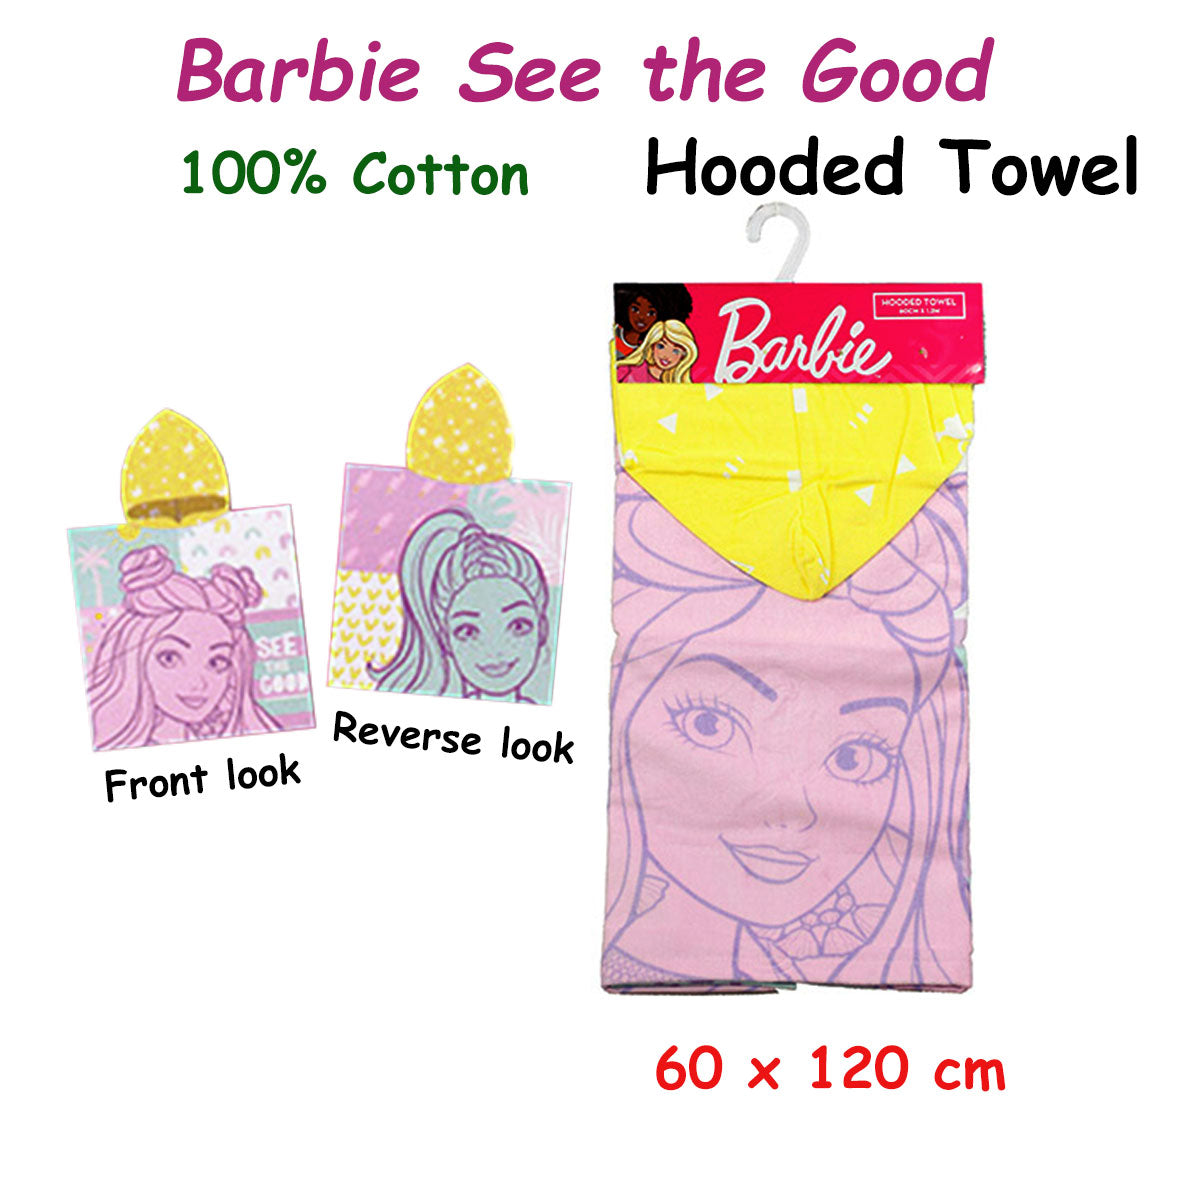 Barbie See the Good Cotton Hooded Licensed Towel 60 x 120 cm